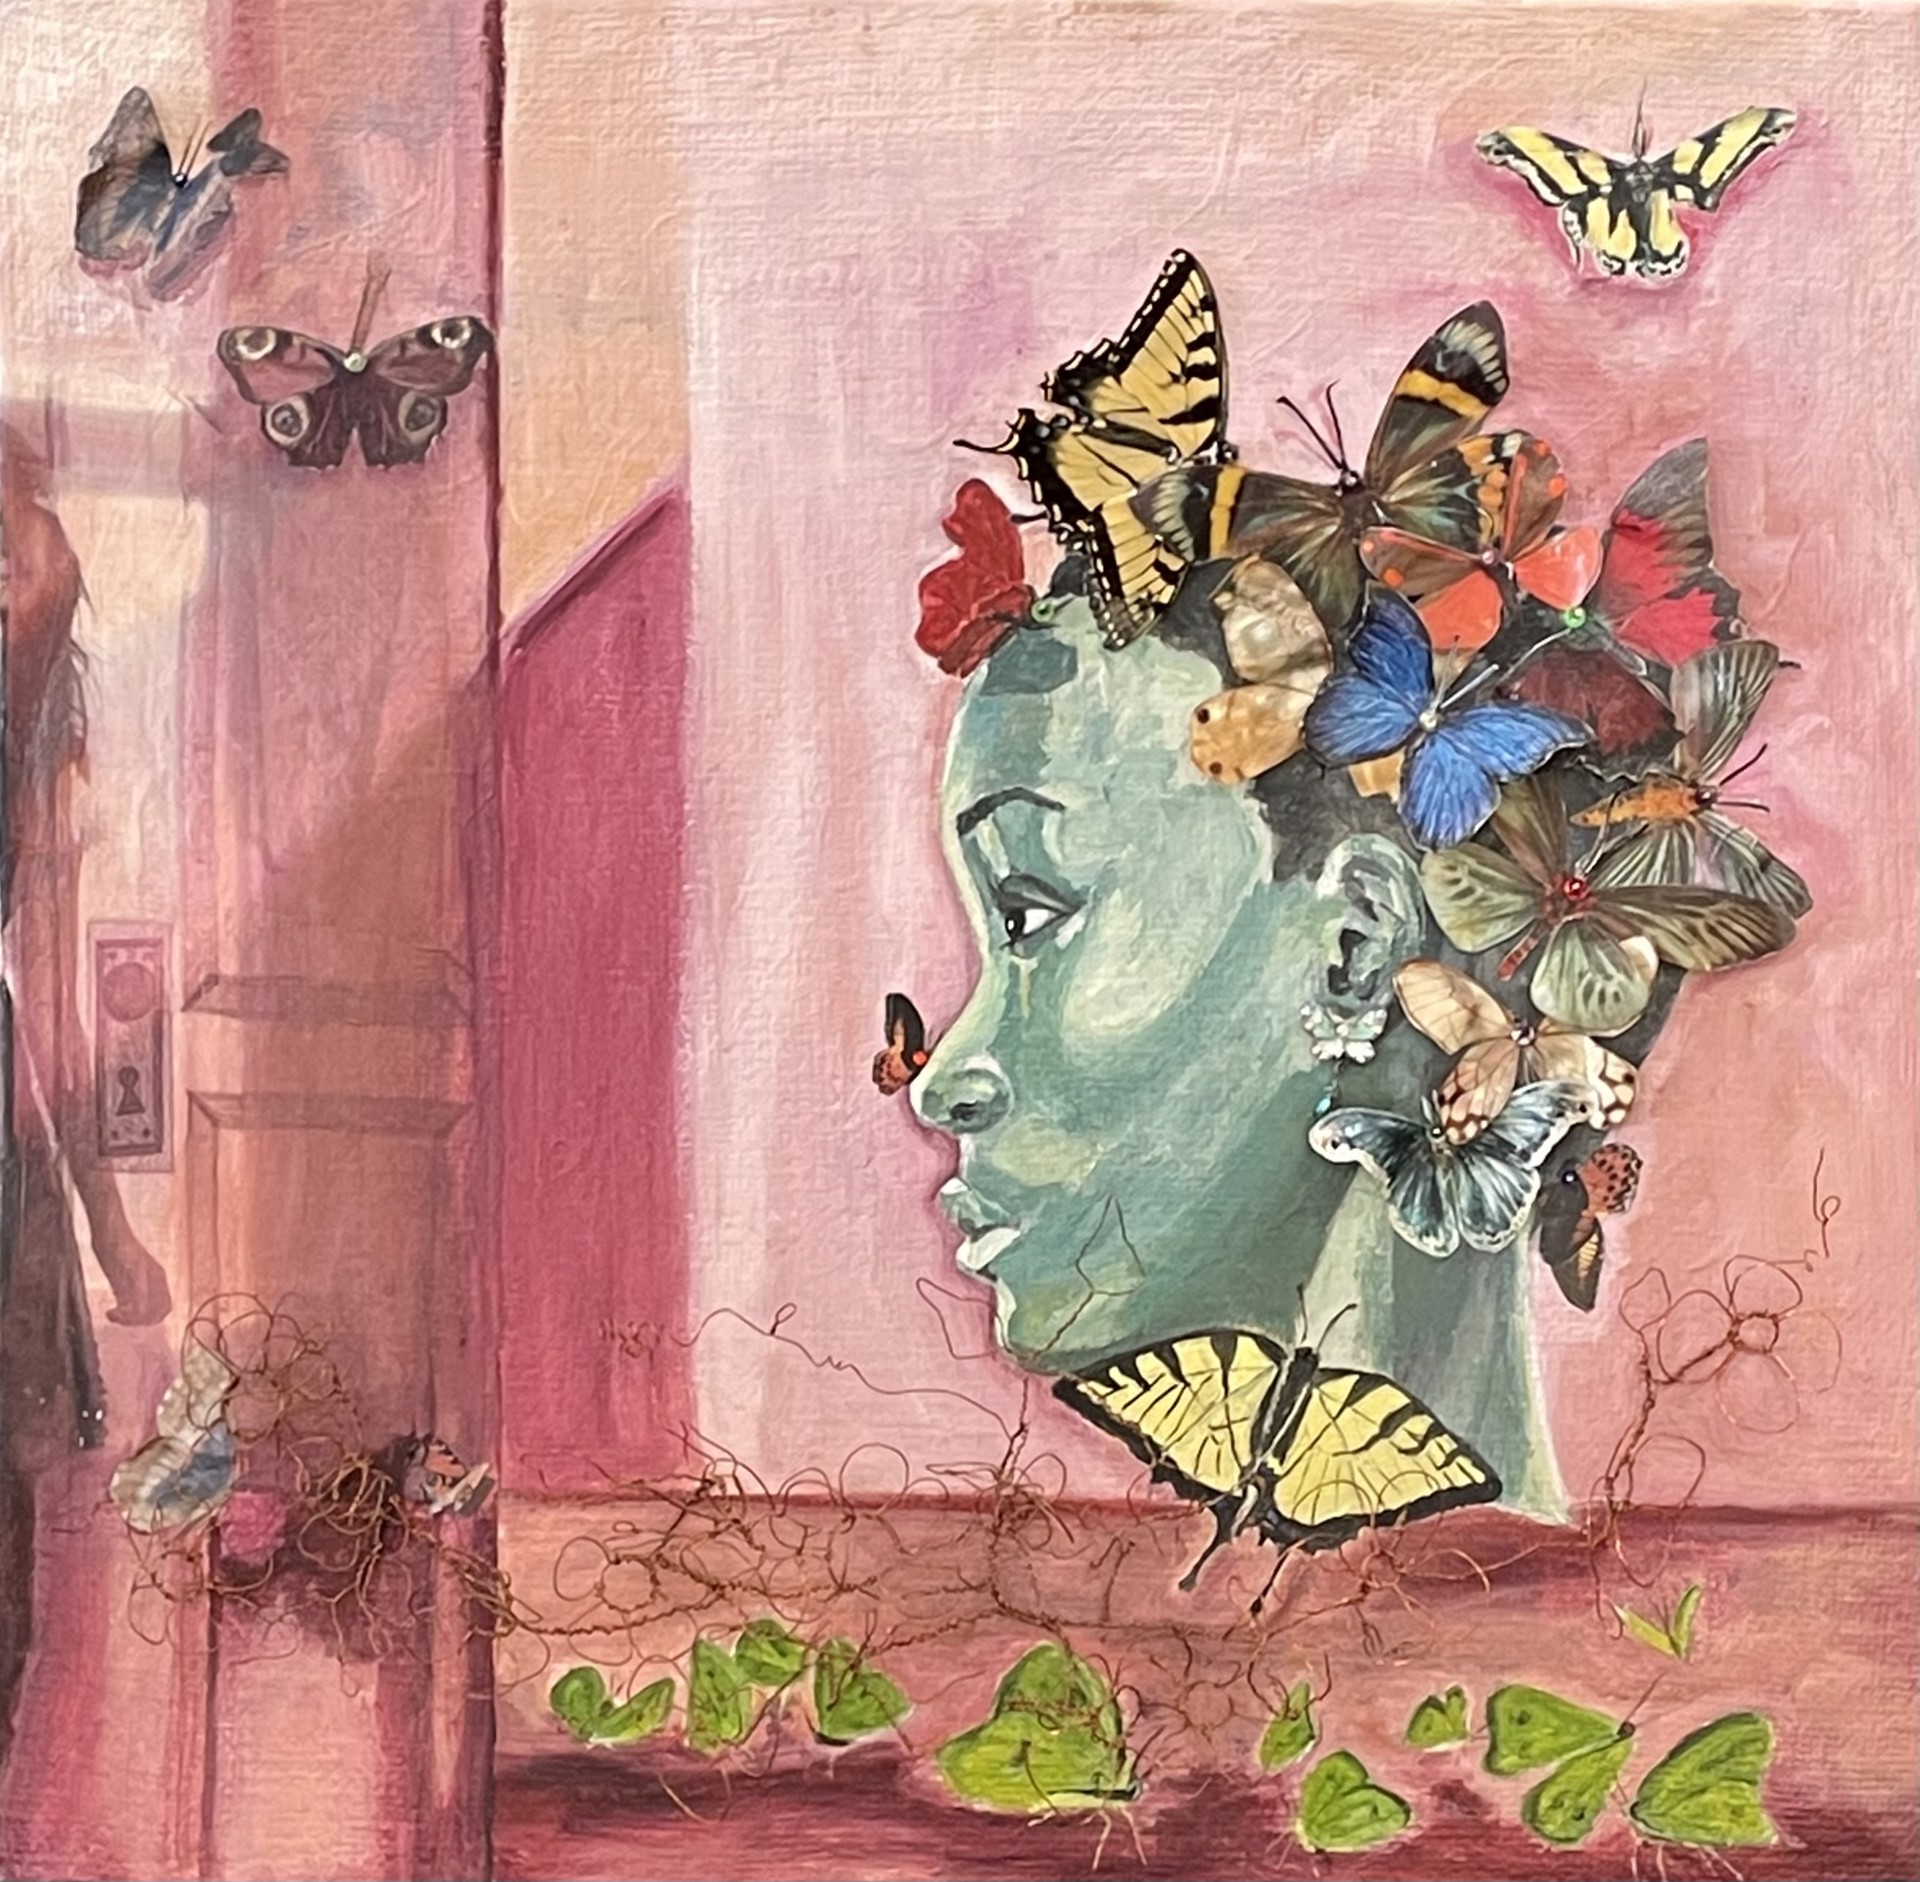 Conference of Butterflies by Ila Hallmark